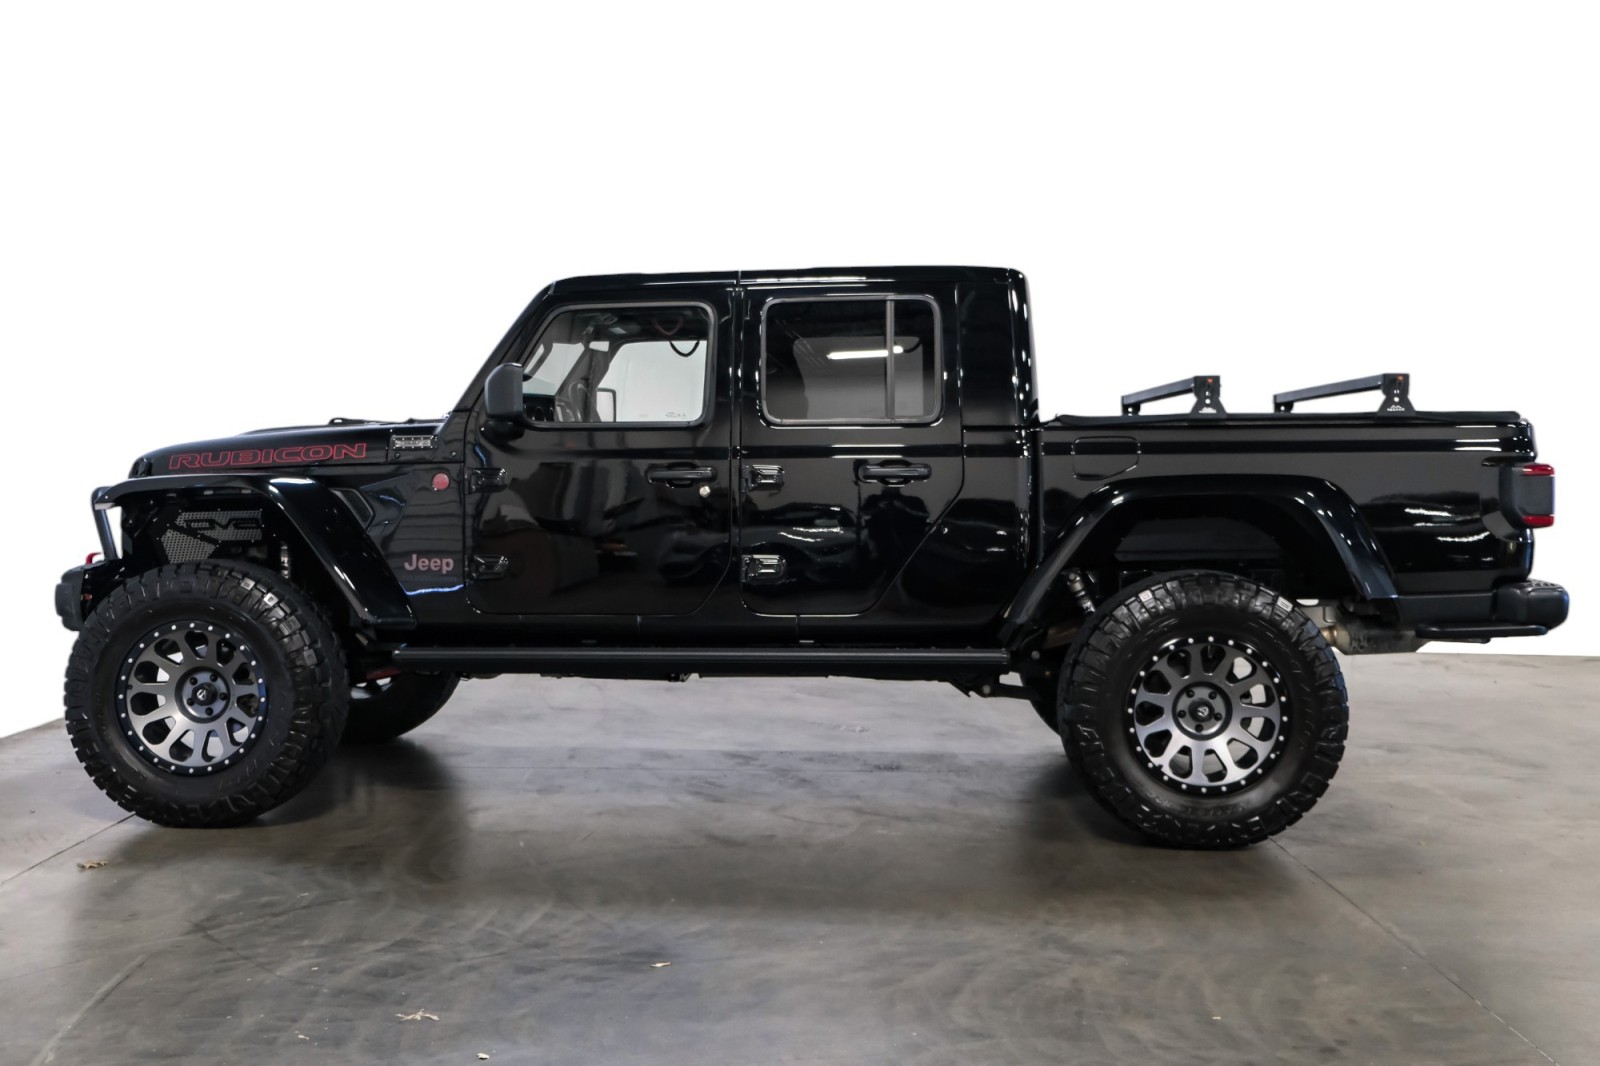 2020 Jeep Gladiator Rubicon 4x4 LaunchEdition 24ZPkg LIFTED CustomBump 9